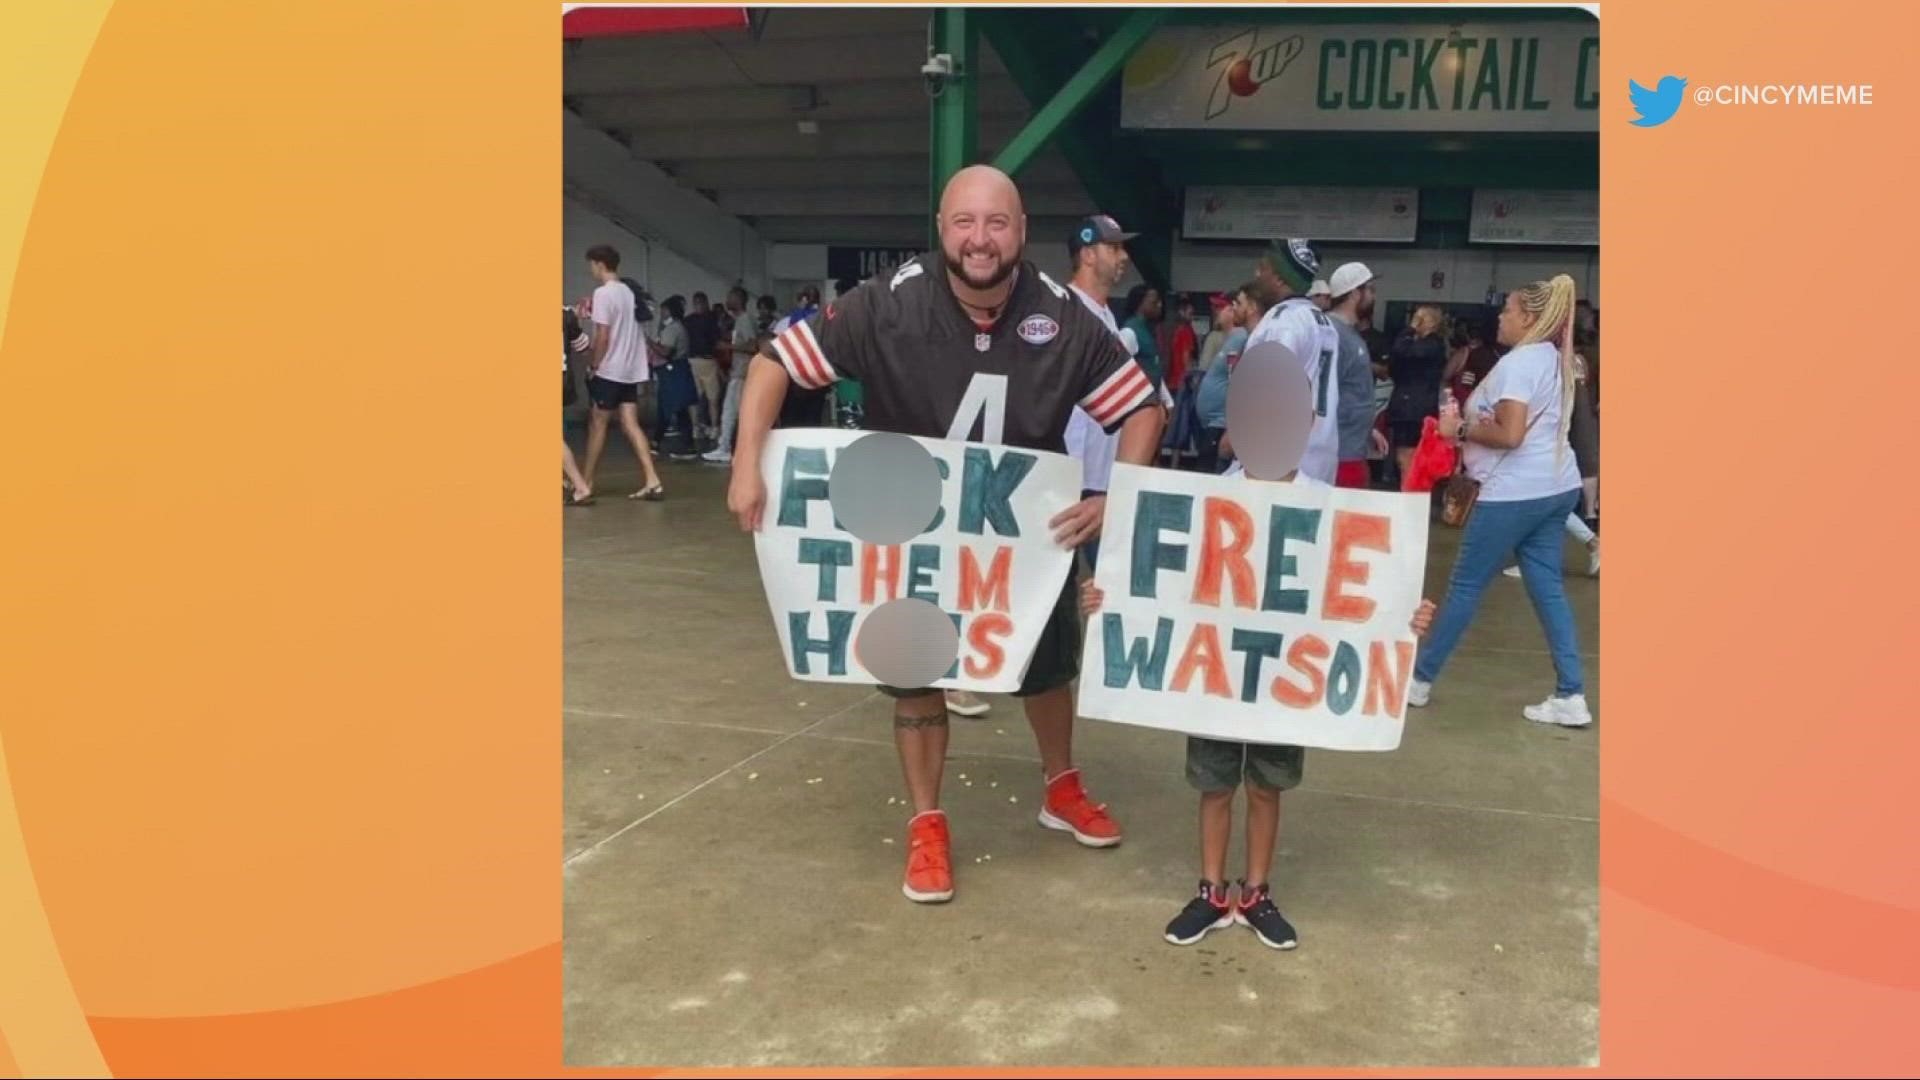 Both the t-shirts and posters seem to reference the controversy surrounding Deshaun Watson.